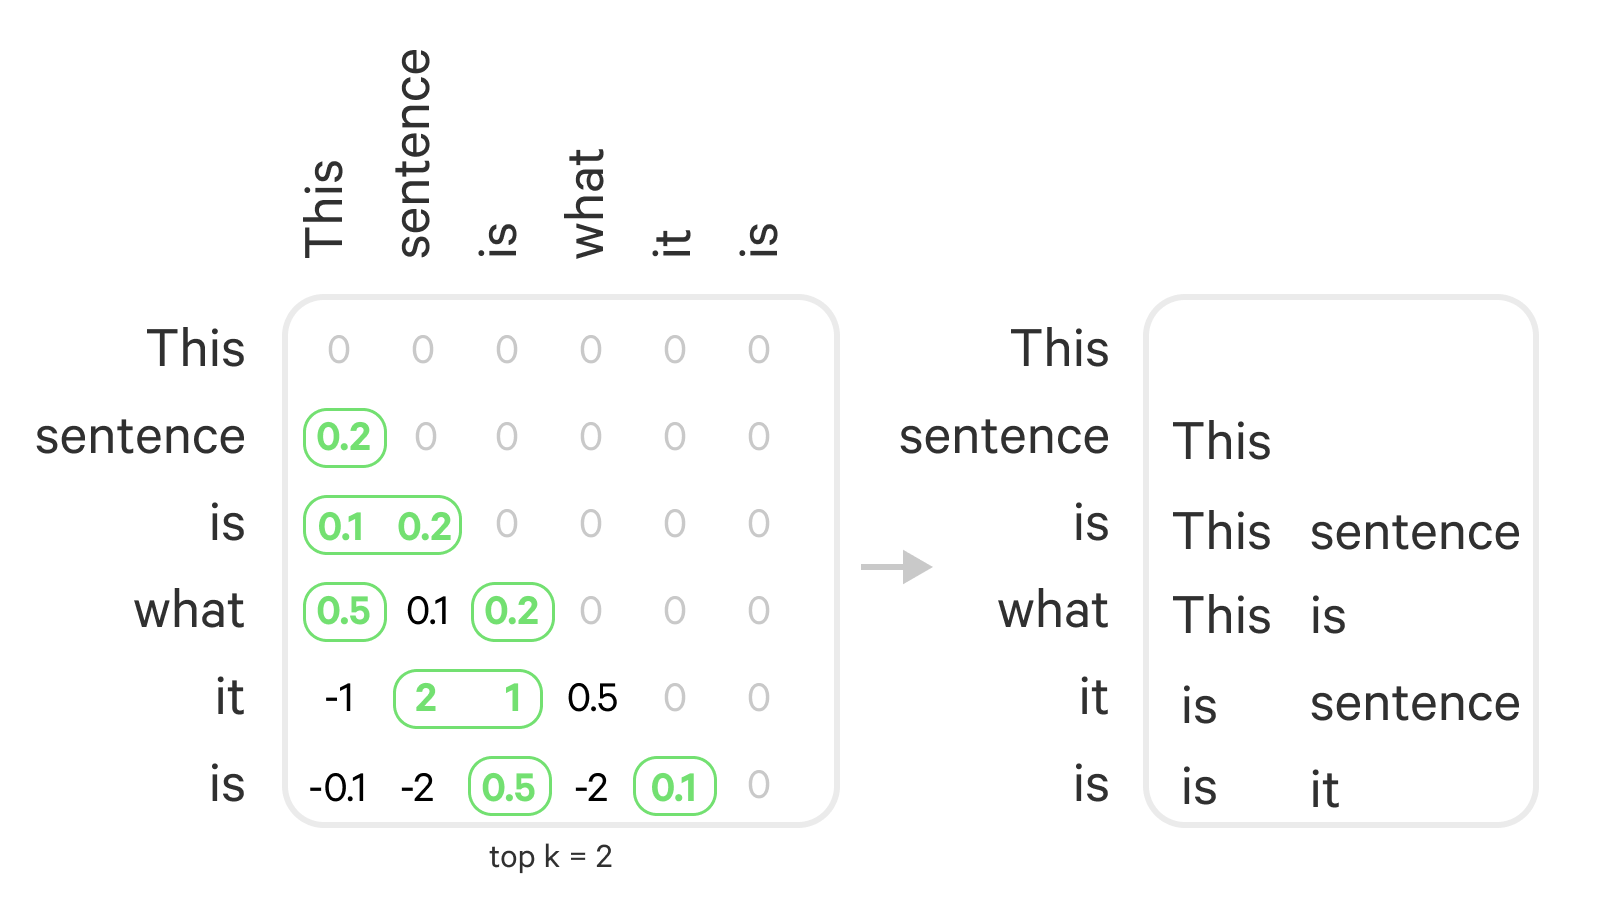 An illustration of selecting the top k antecedents